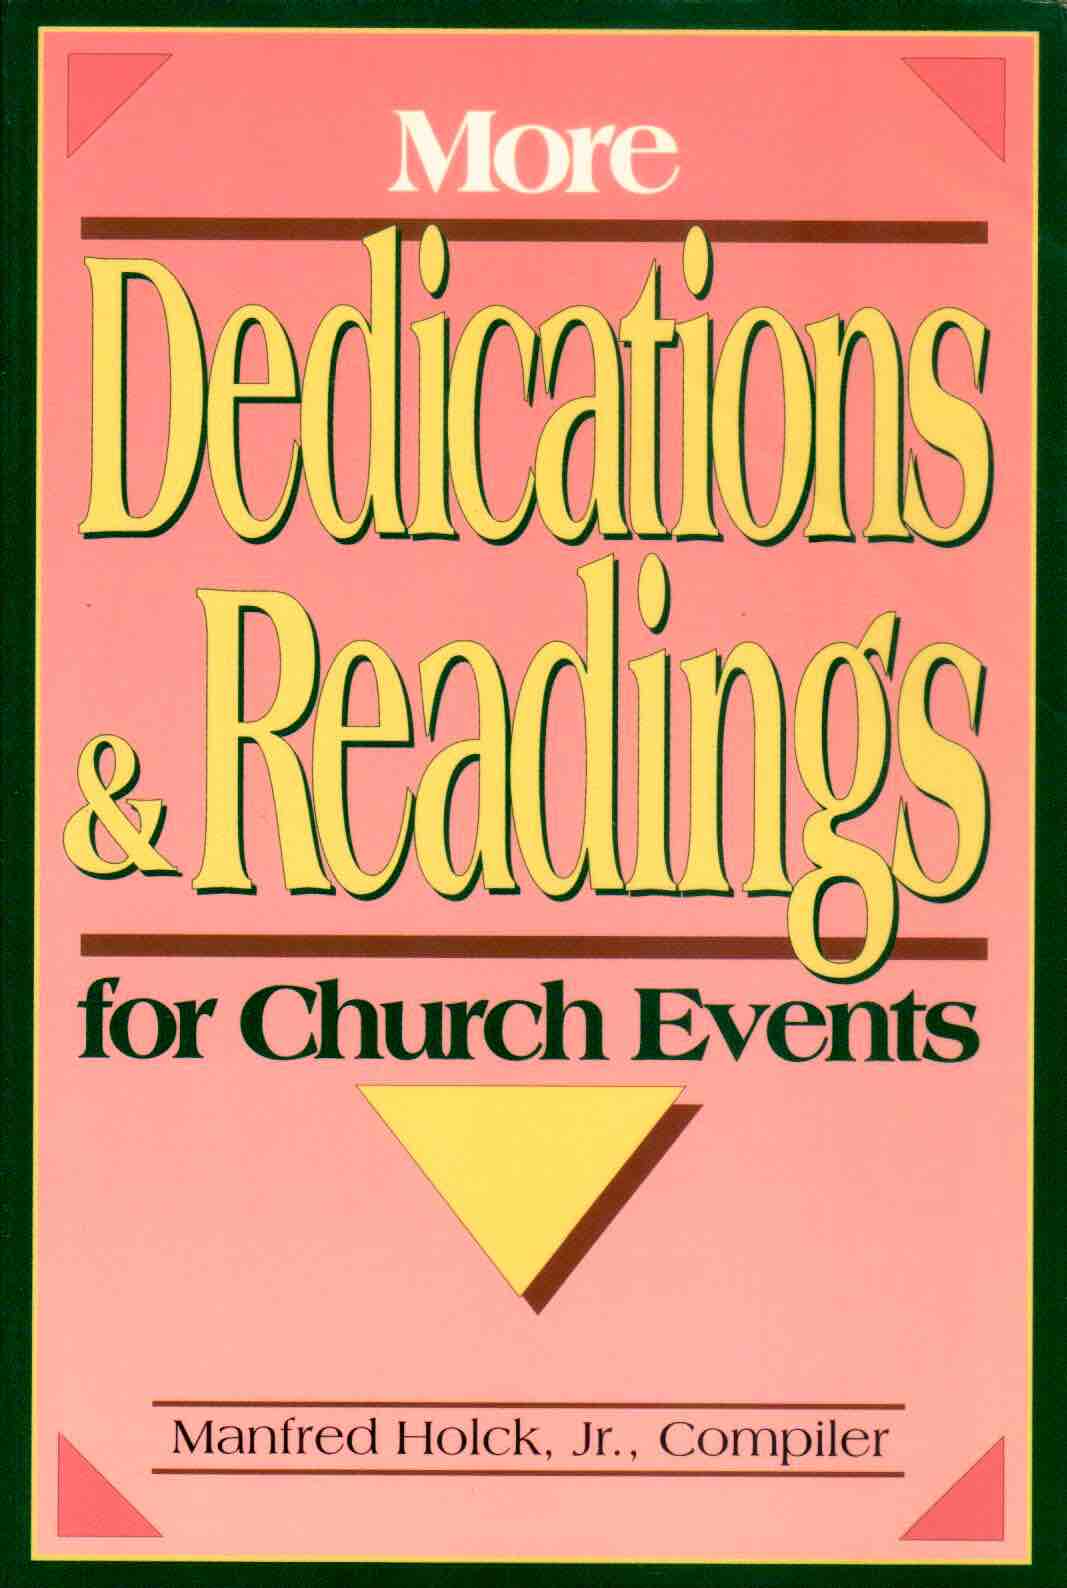 Cover of More Dedications & Readings for Church Events